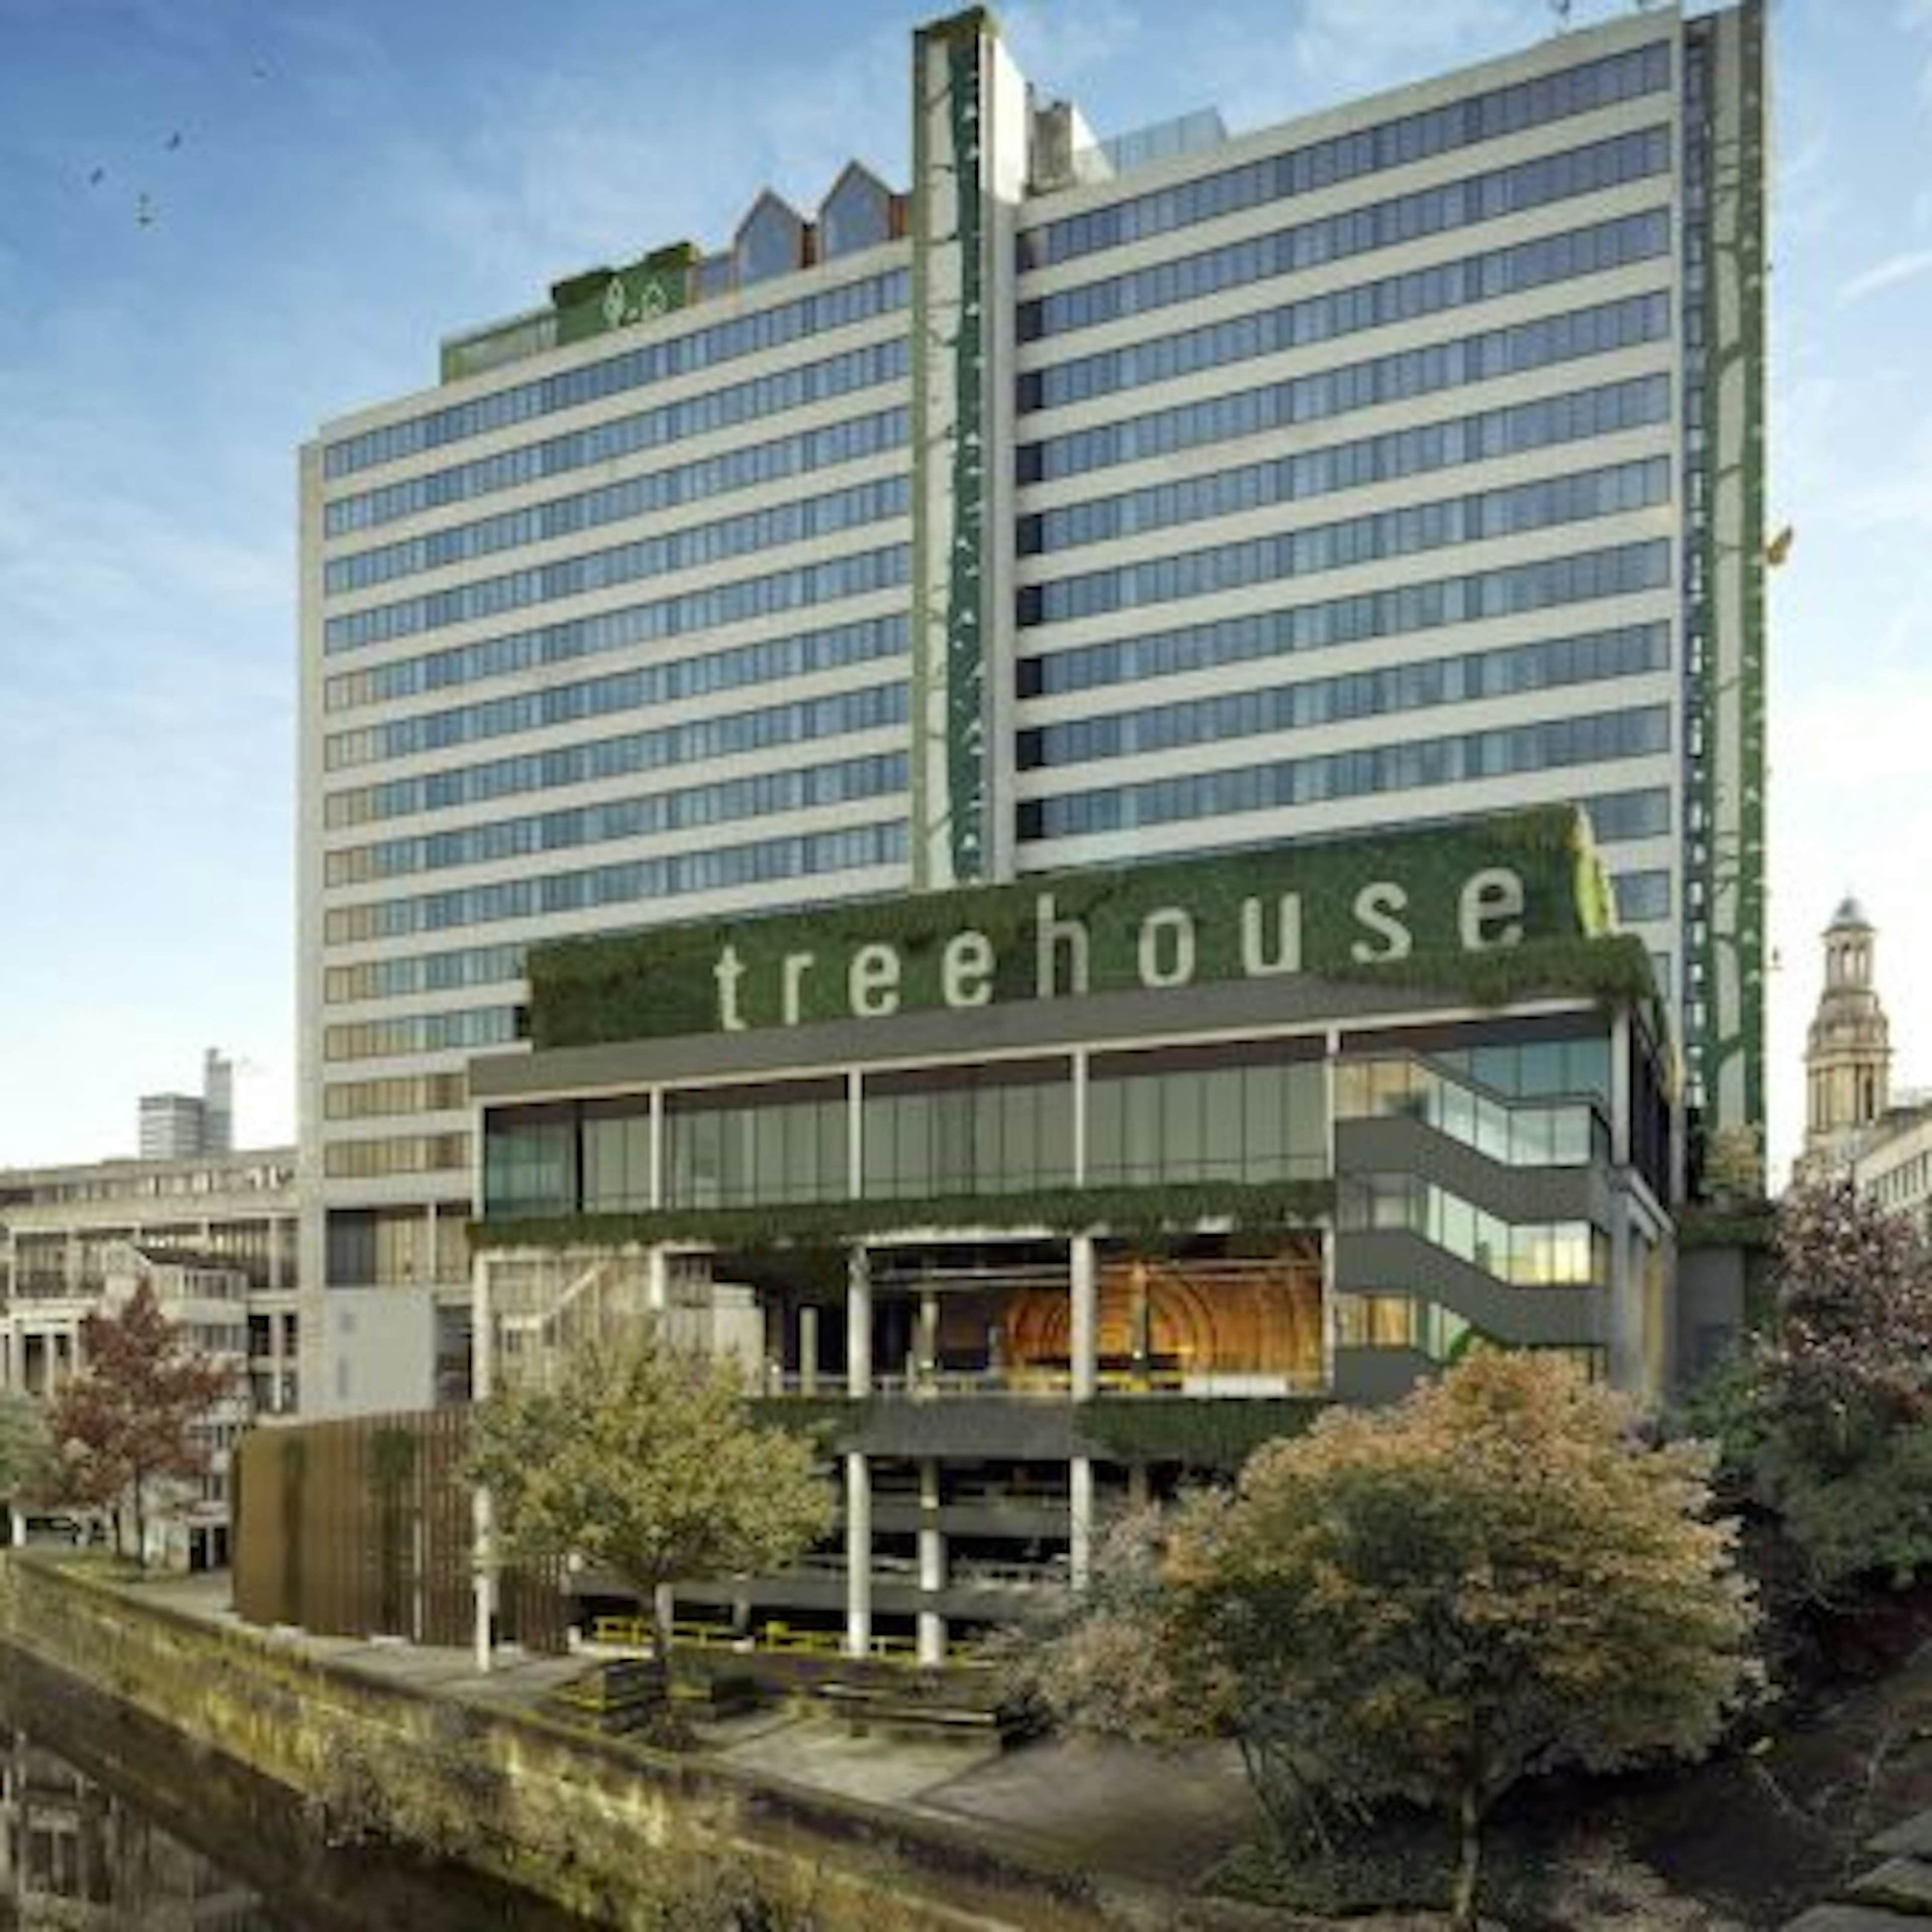 Treehouse Hotel Manchester - image 2